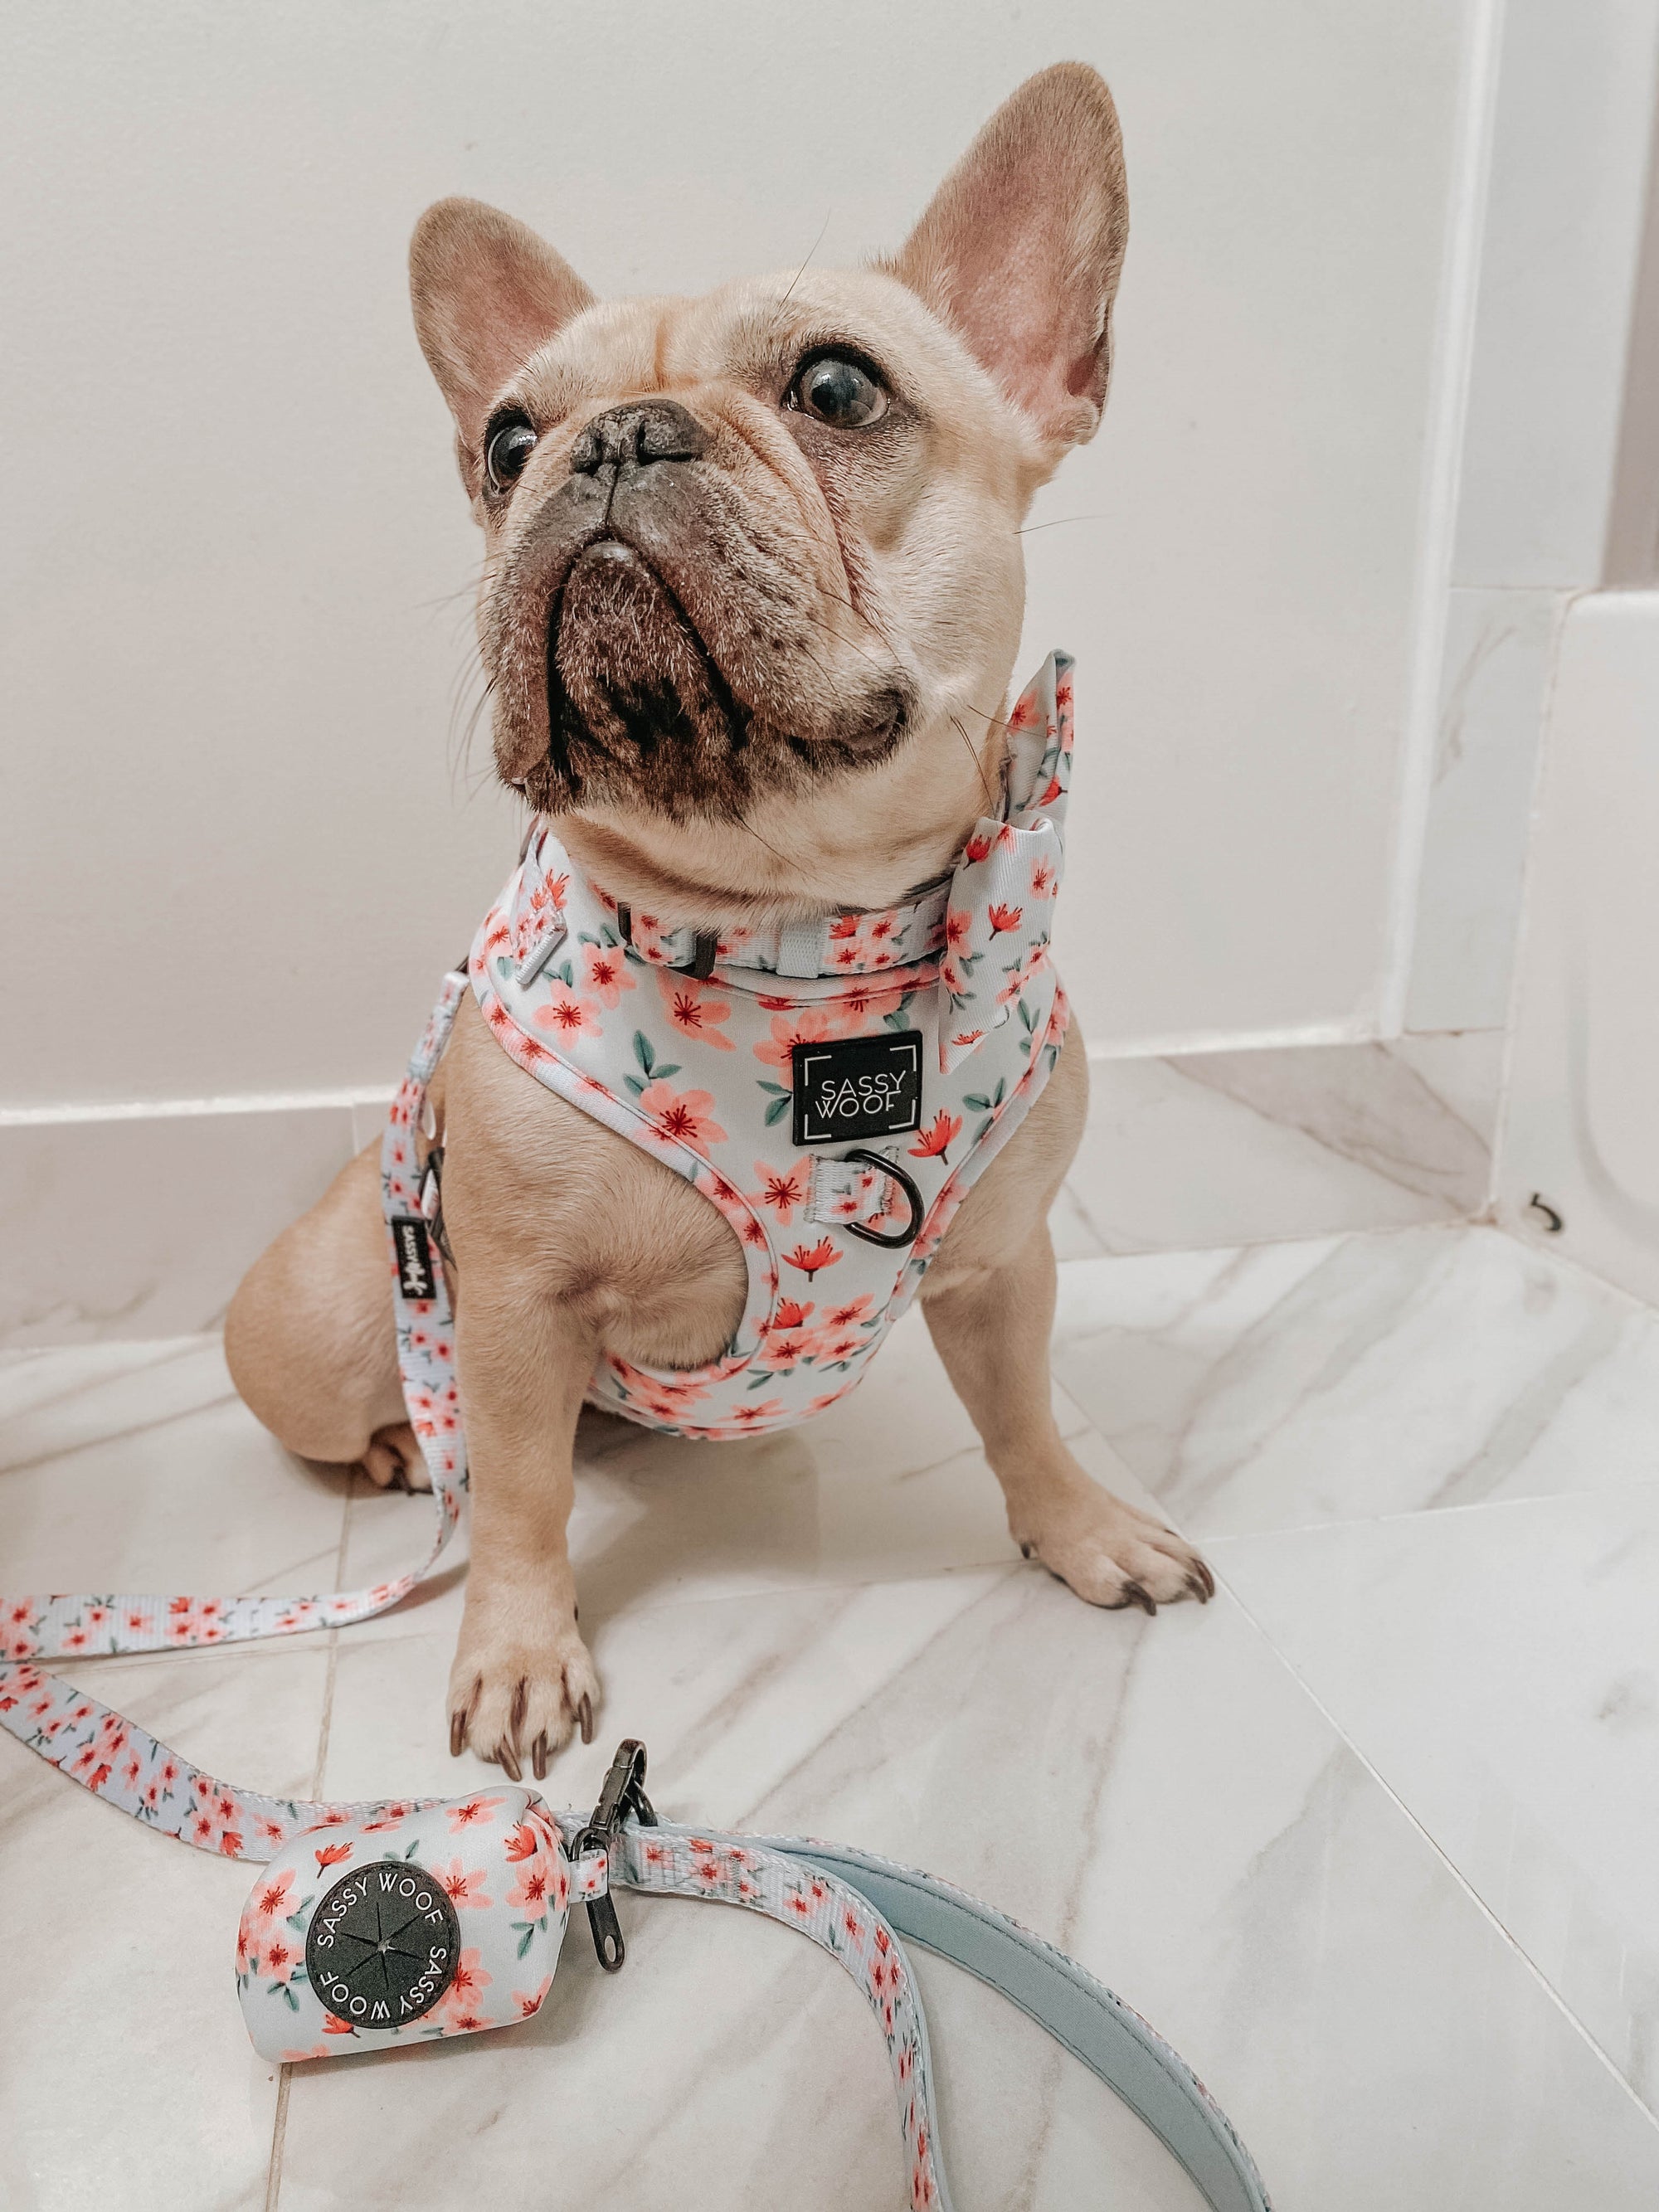 INFLUENCER_CONTENT | @LILLYMOONFRENCHIE |